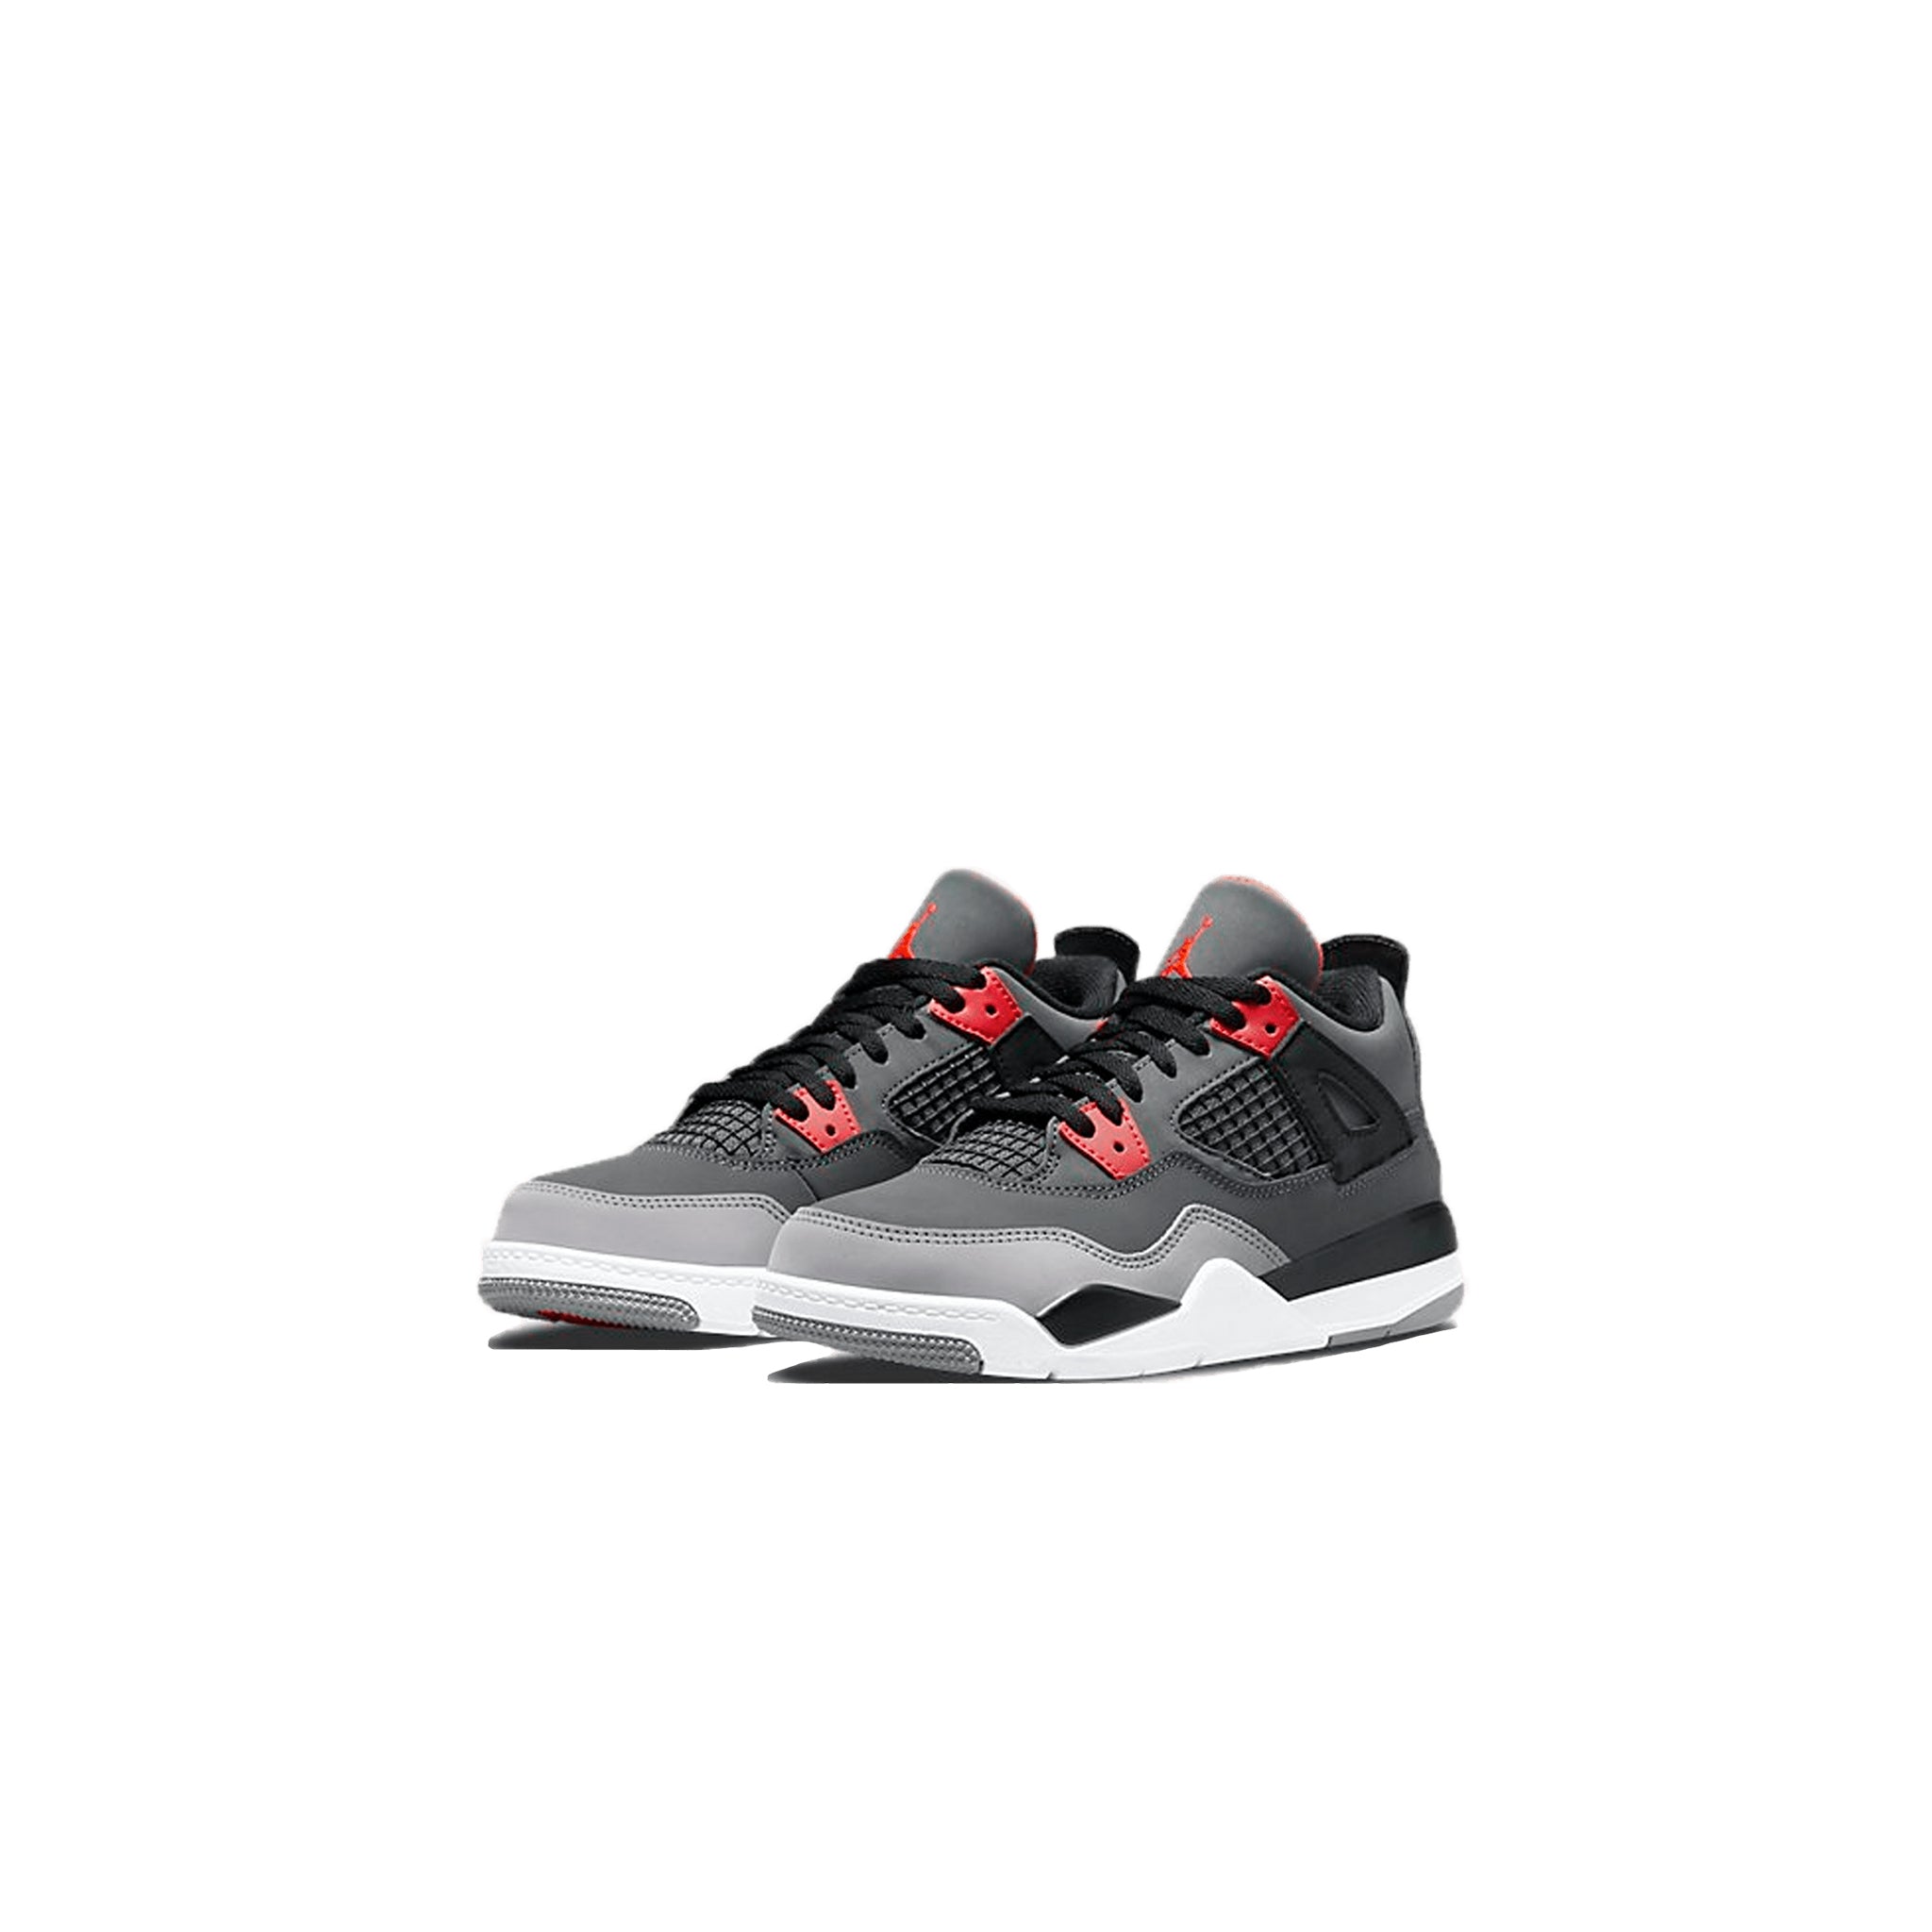 Front side view of Air Jordan 4 Retro Infrared (PS) BQ7669-061